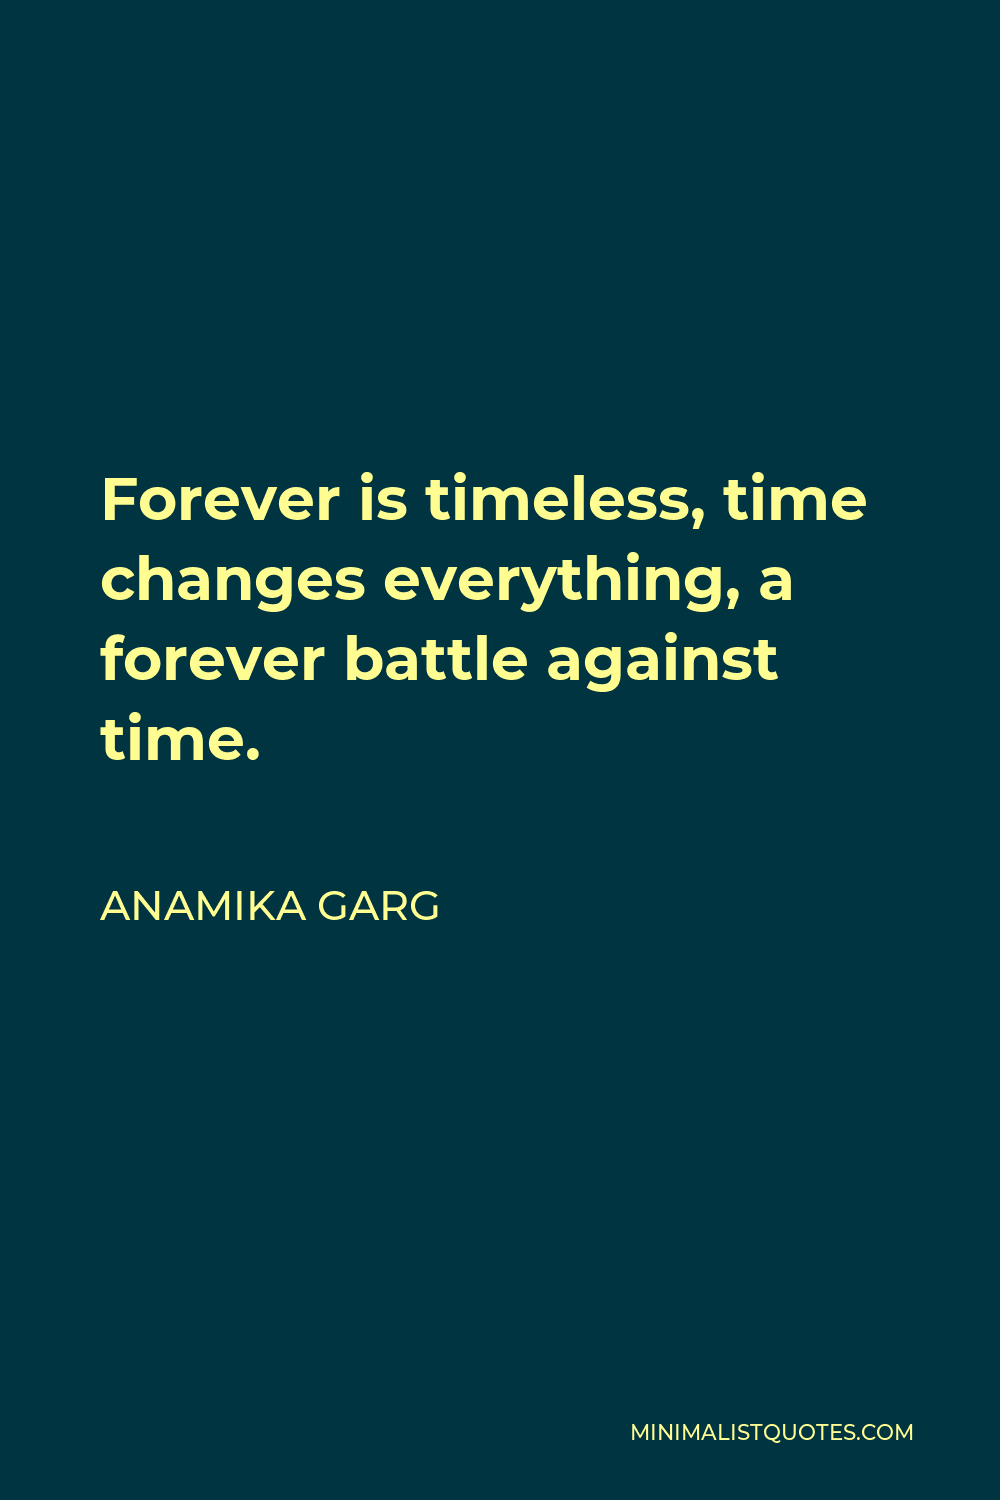 Anamika Garg Quote - Forever is timeless, time changes everything, a forever battle against time.